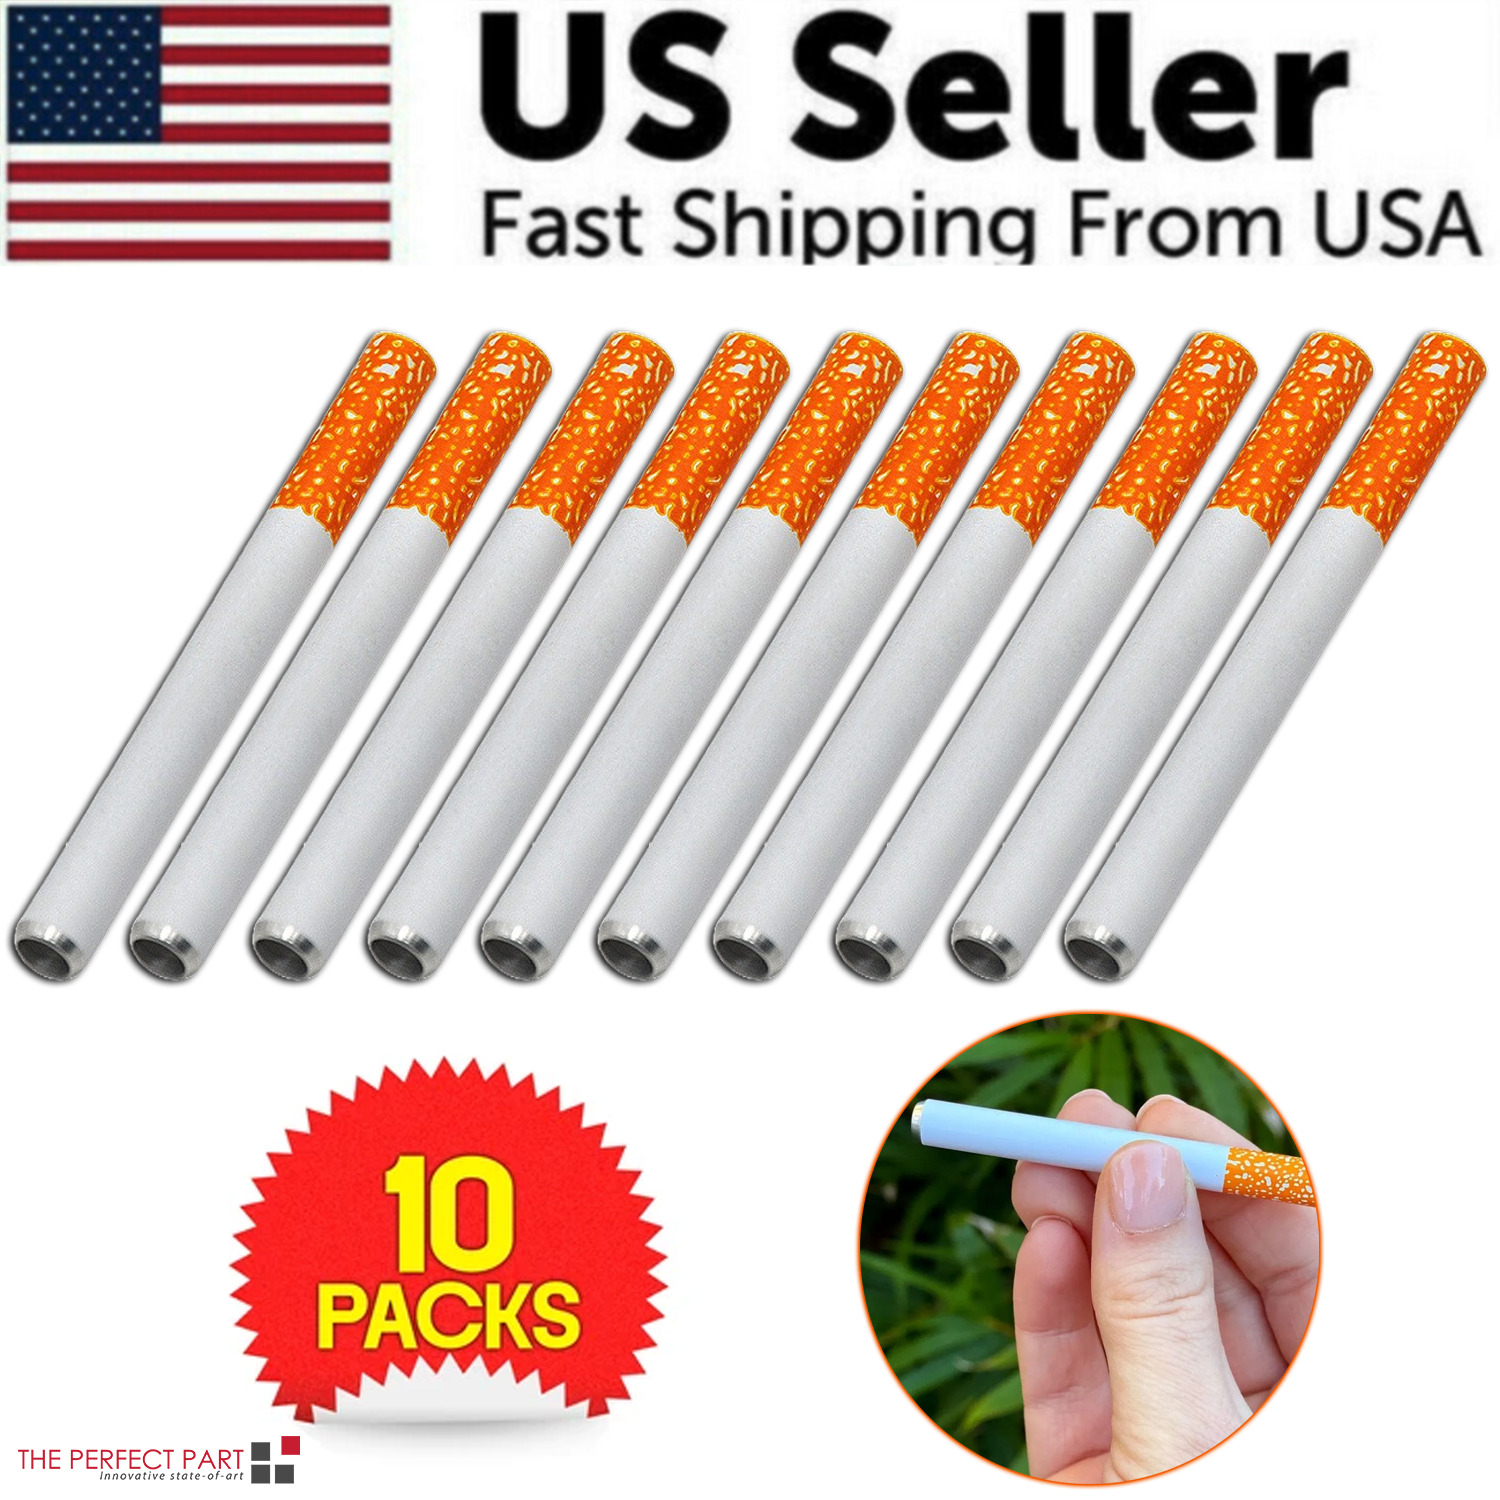 10 Pack 3” One Hitter Pipe Aluminum Bat Tobacco Smoking Dugout Accessories - USA